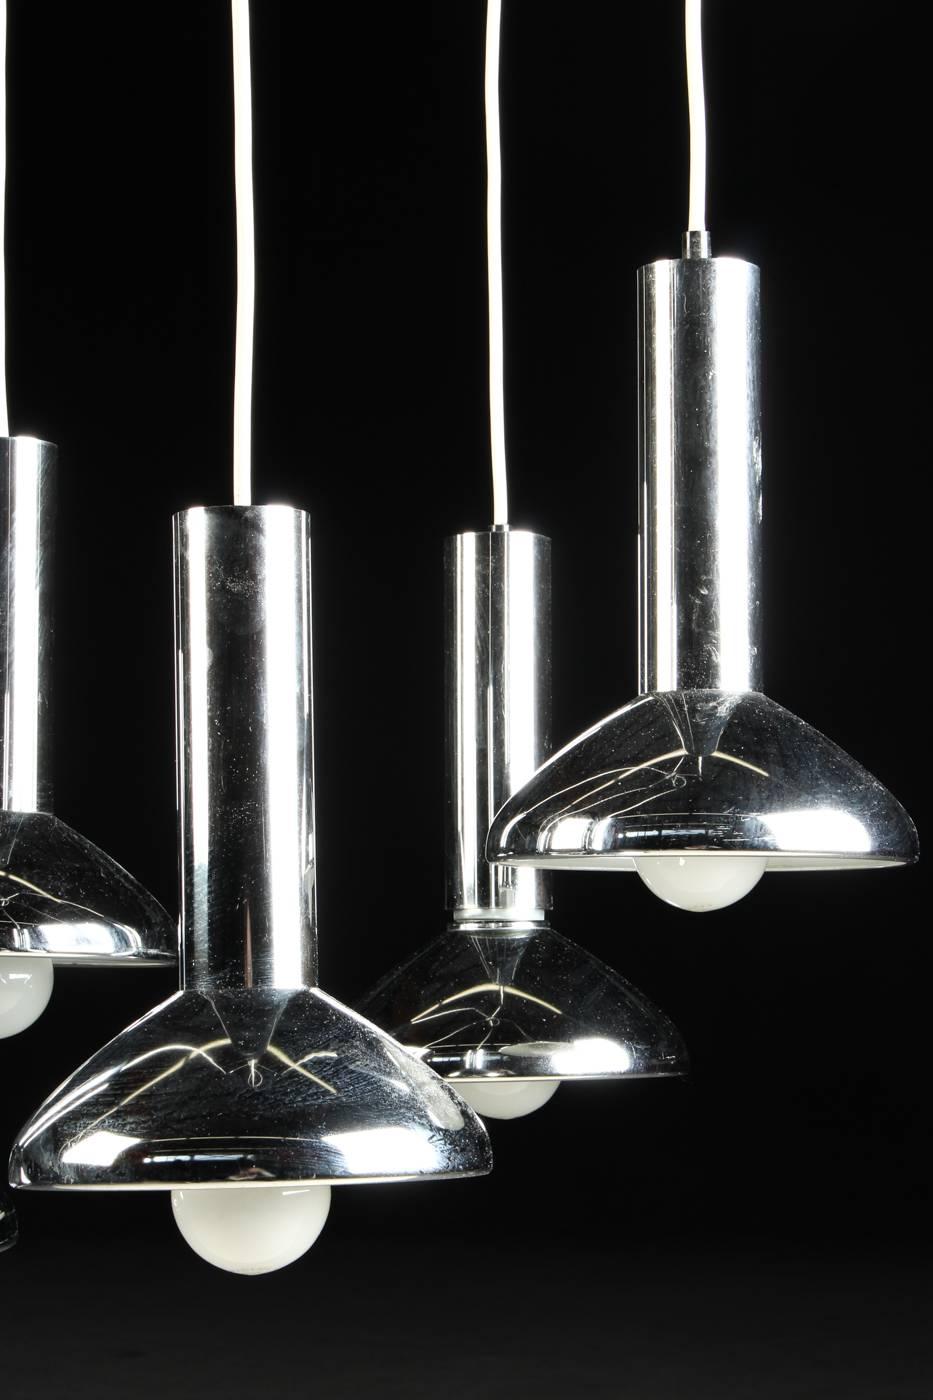 This modern pendant light was produced by Hustadt-Leuchten in Germany. It features five chrome-plated lamp shades, each with a diameter of Ø 17 cm and 26 cm length.